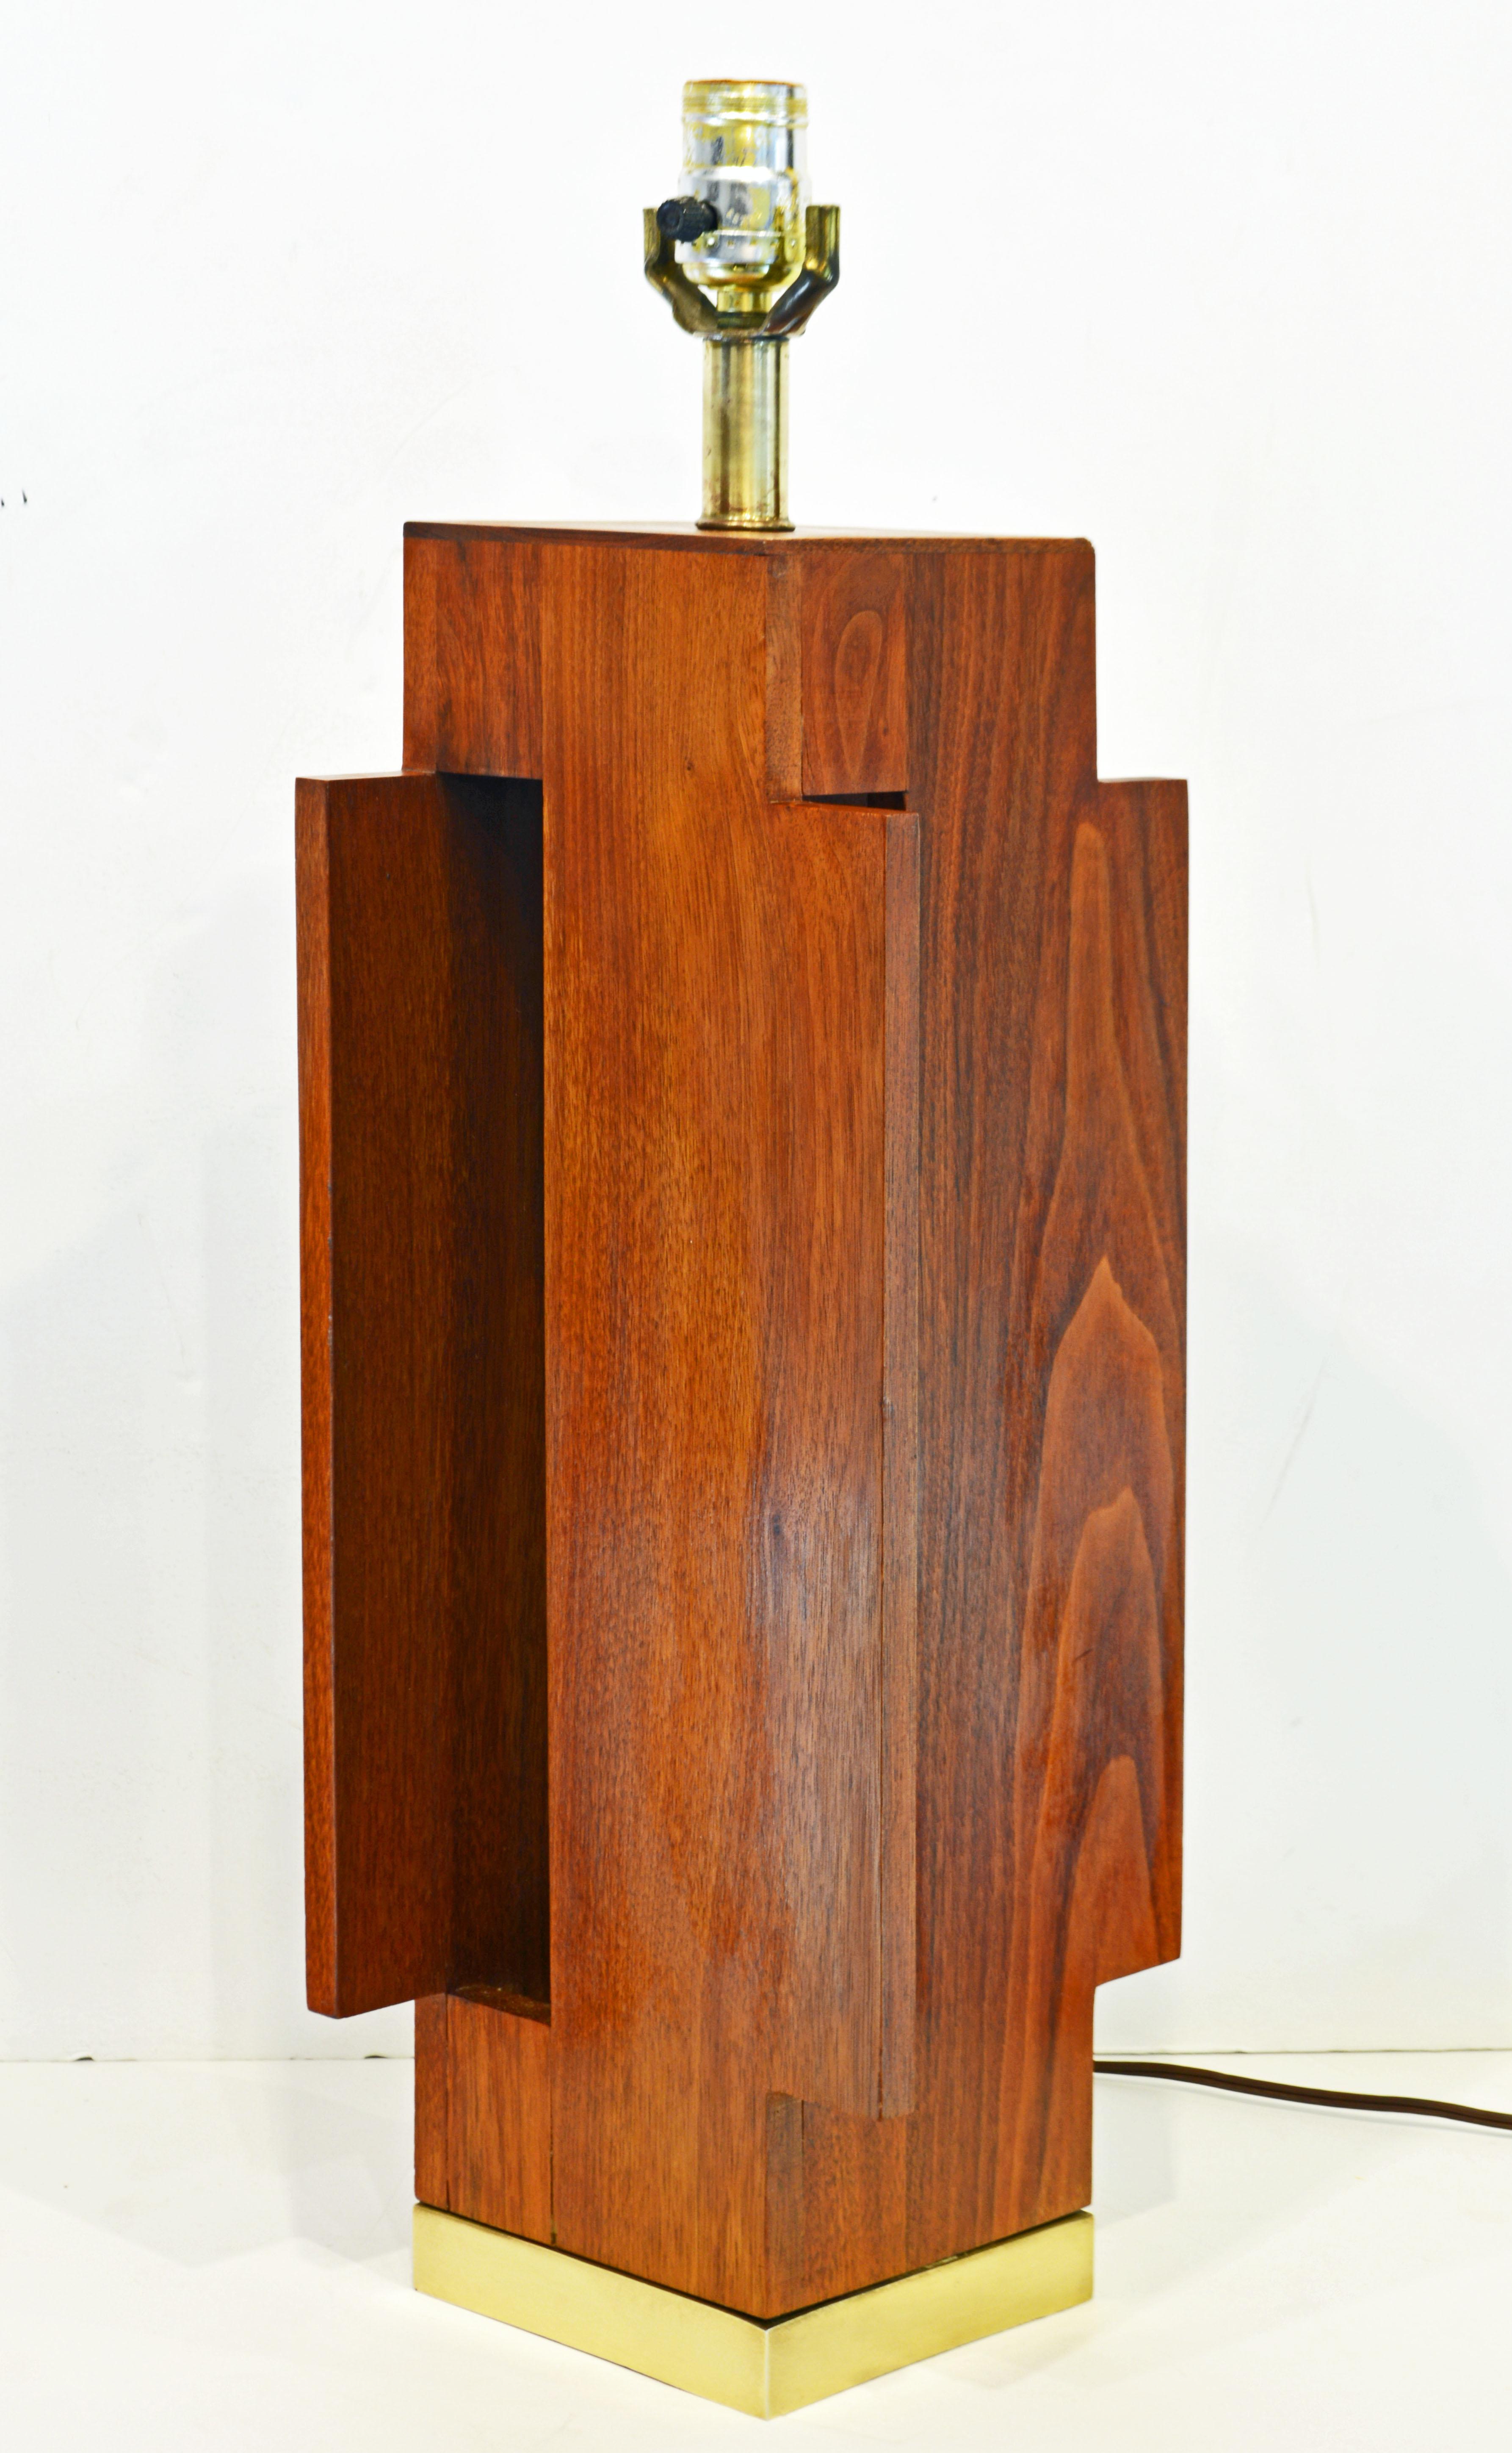 This mid-century artistic teak table lamp offers new inspiring views from all angles like a beautiful modern building. It is mounted on a cast solid brass base.